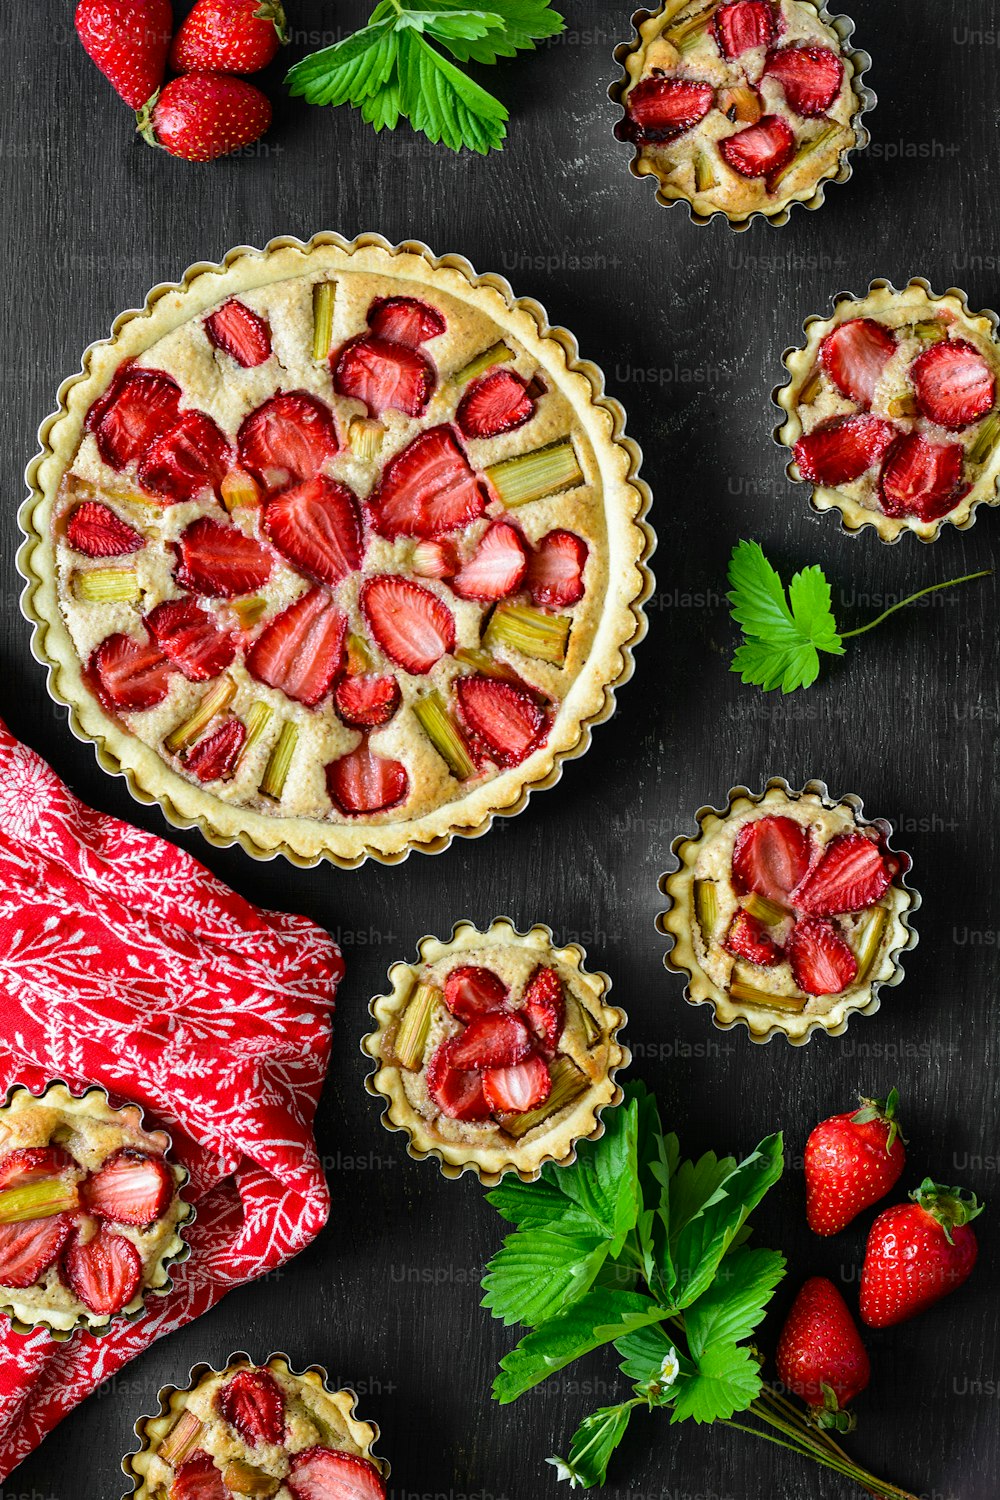 Homemade tarts with strawberry and rhubarb on black wooden background. Top view. Rustic style